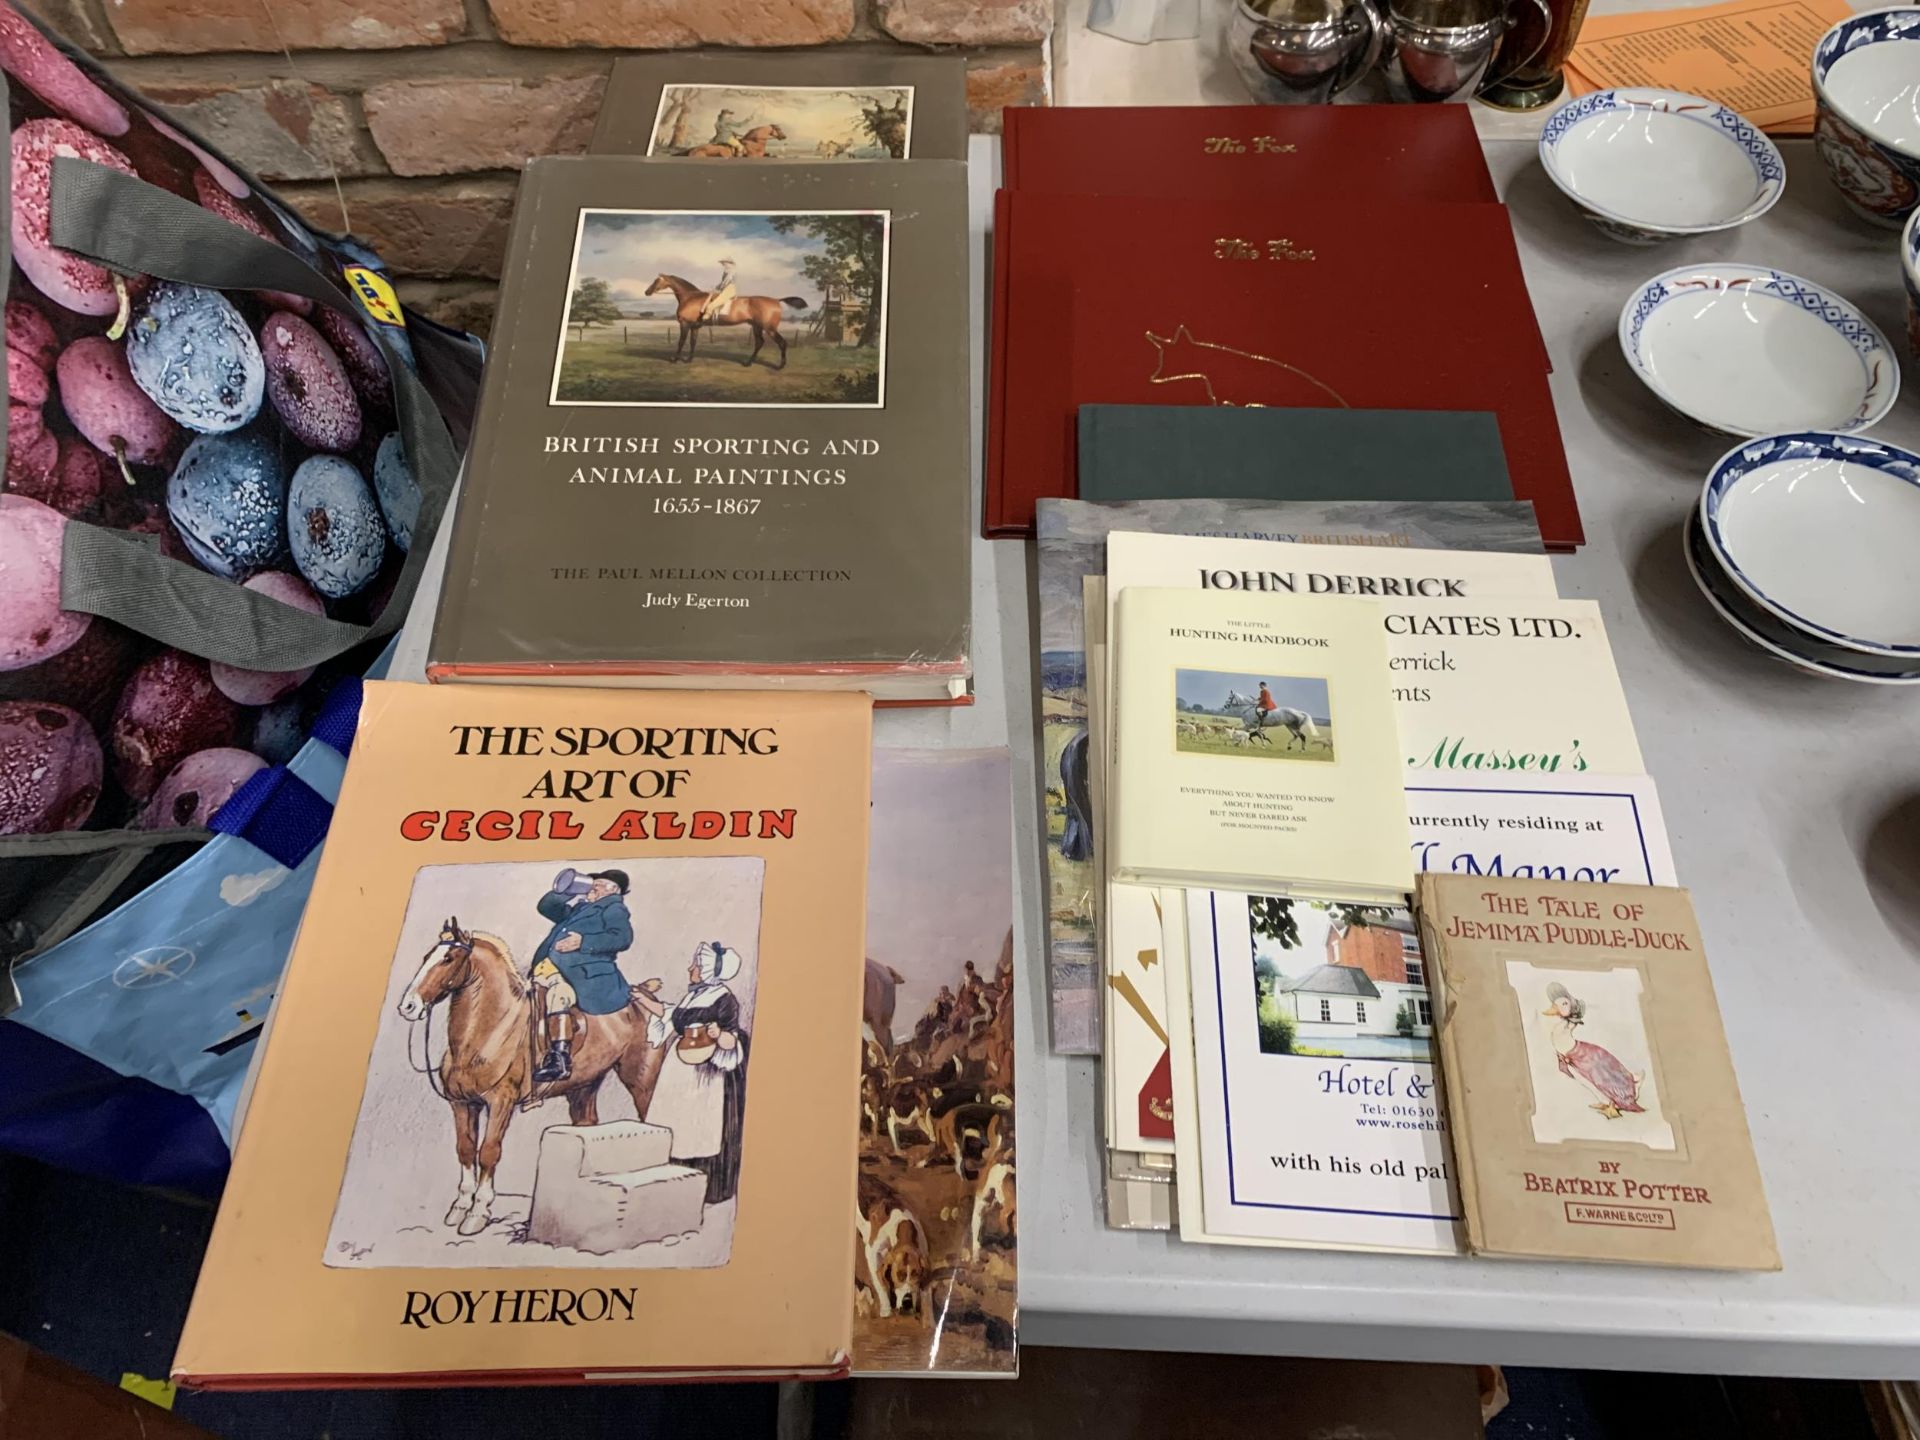 LARGE AMOUNT OF BOOKS TO INCLUDE "THE FOX" "BRITISH SPORTING AND ANIMAL PAINTINGS" BEATRIX POTTER